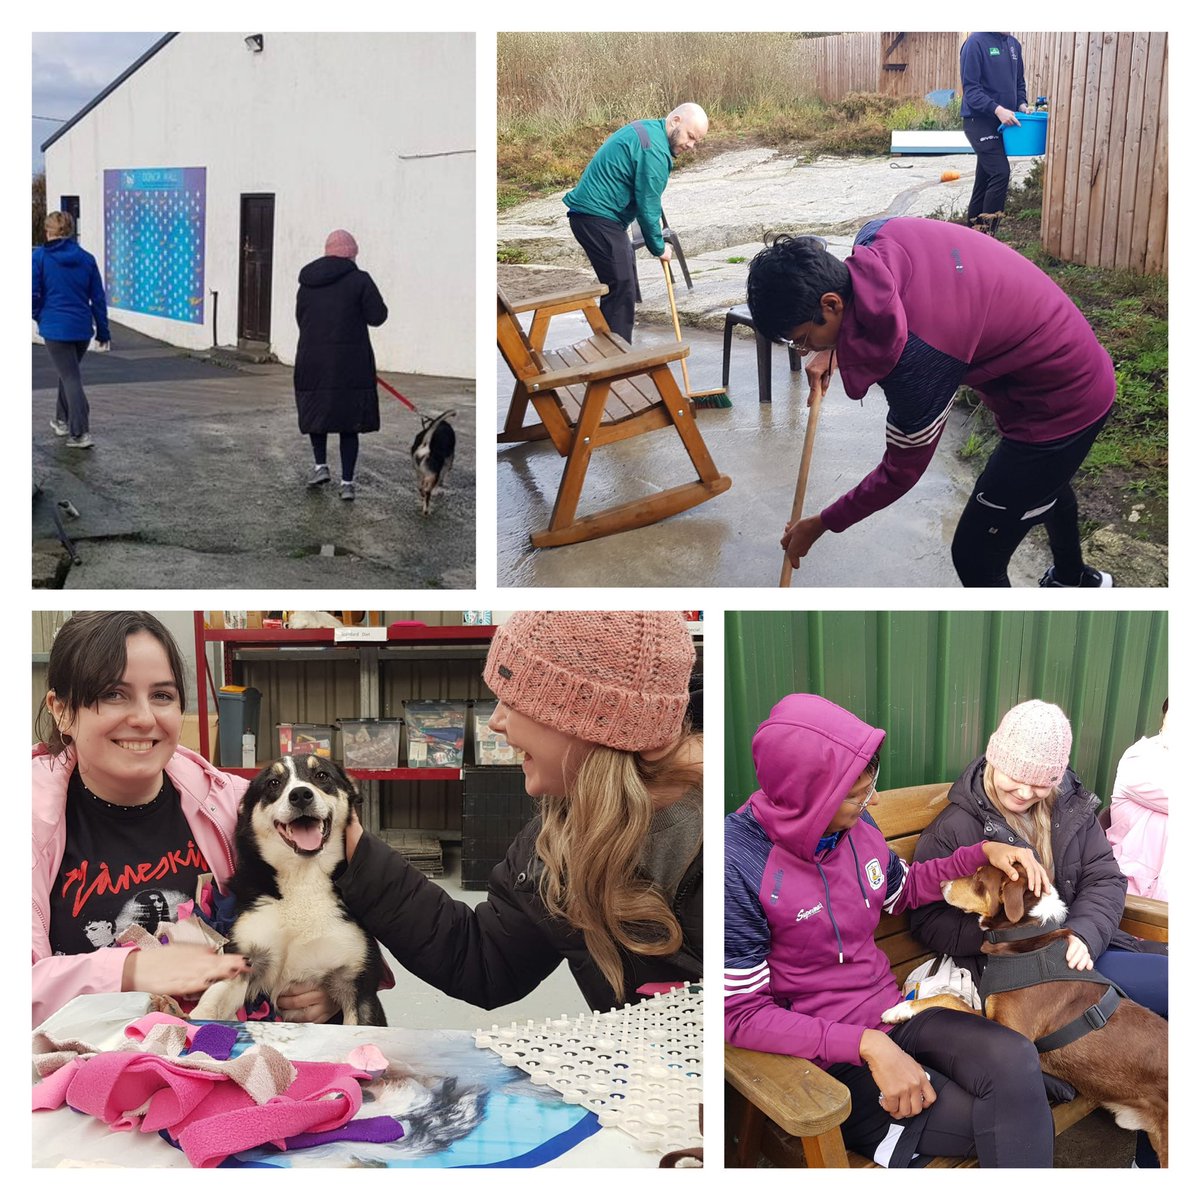 We were delighted to welcome a fab team from #Wayfair #Galway on Tuesday They spent the day walking dogs, cleaning and creating treat filled snuffle mats for our dogs’ enjoyment We’re so grateful for Corporate #volunteers 🐕🐾👏 #MADRA #givingback #CSR